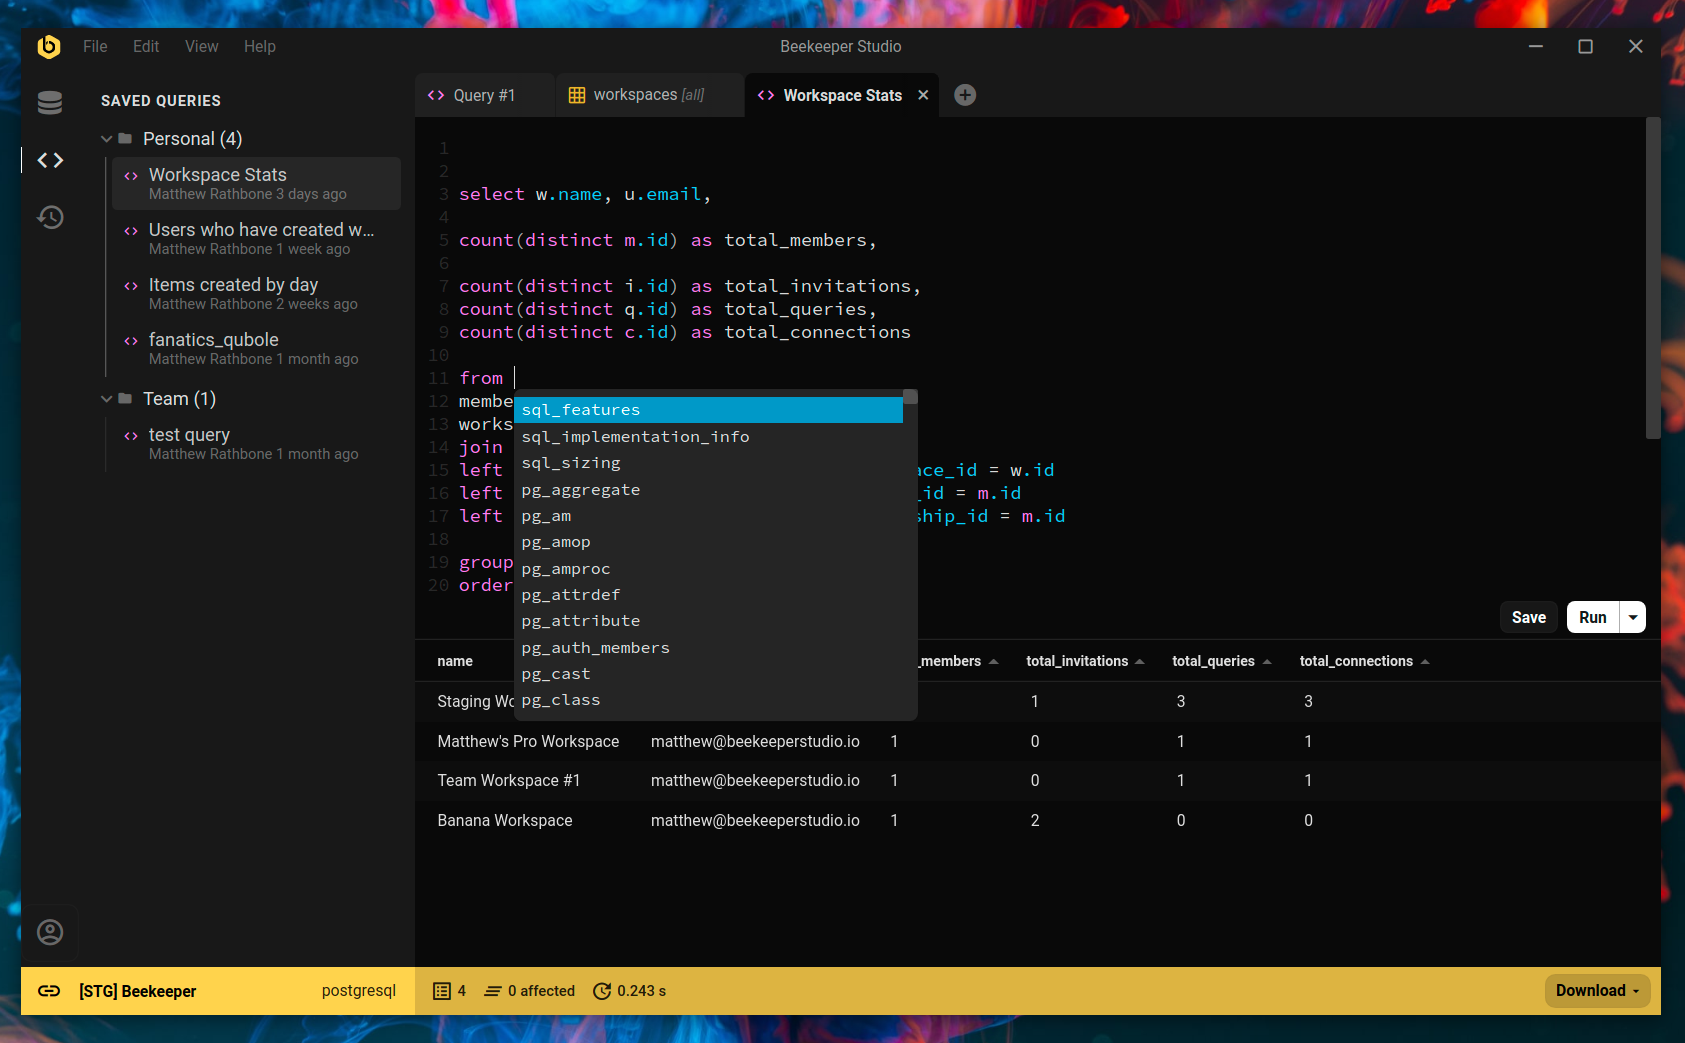 free for mac download Sublime Text